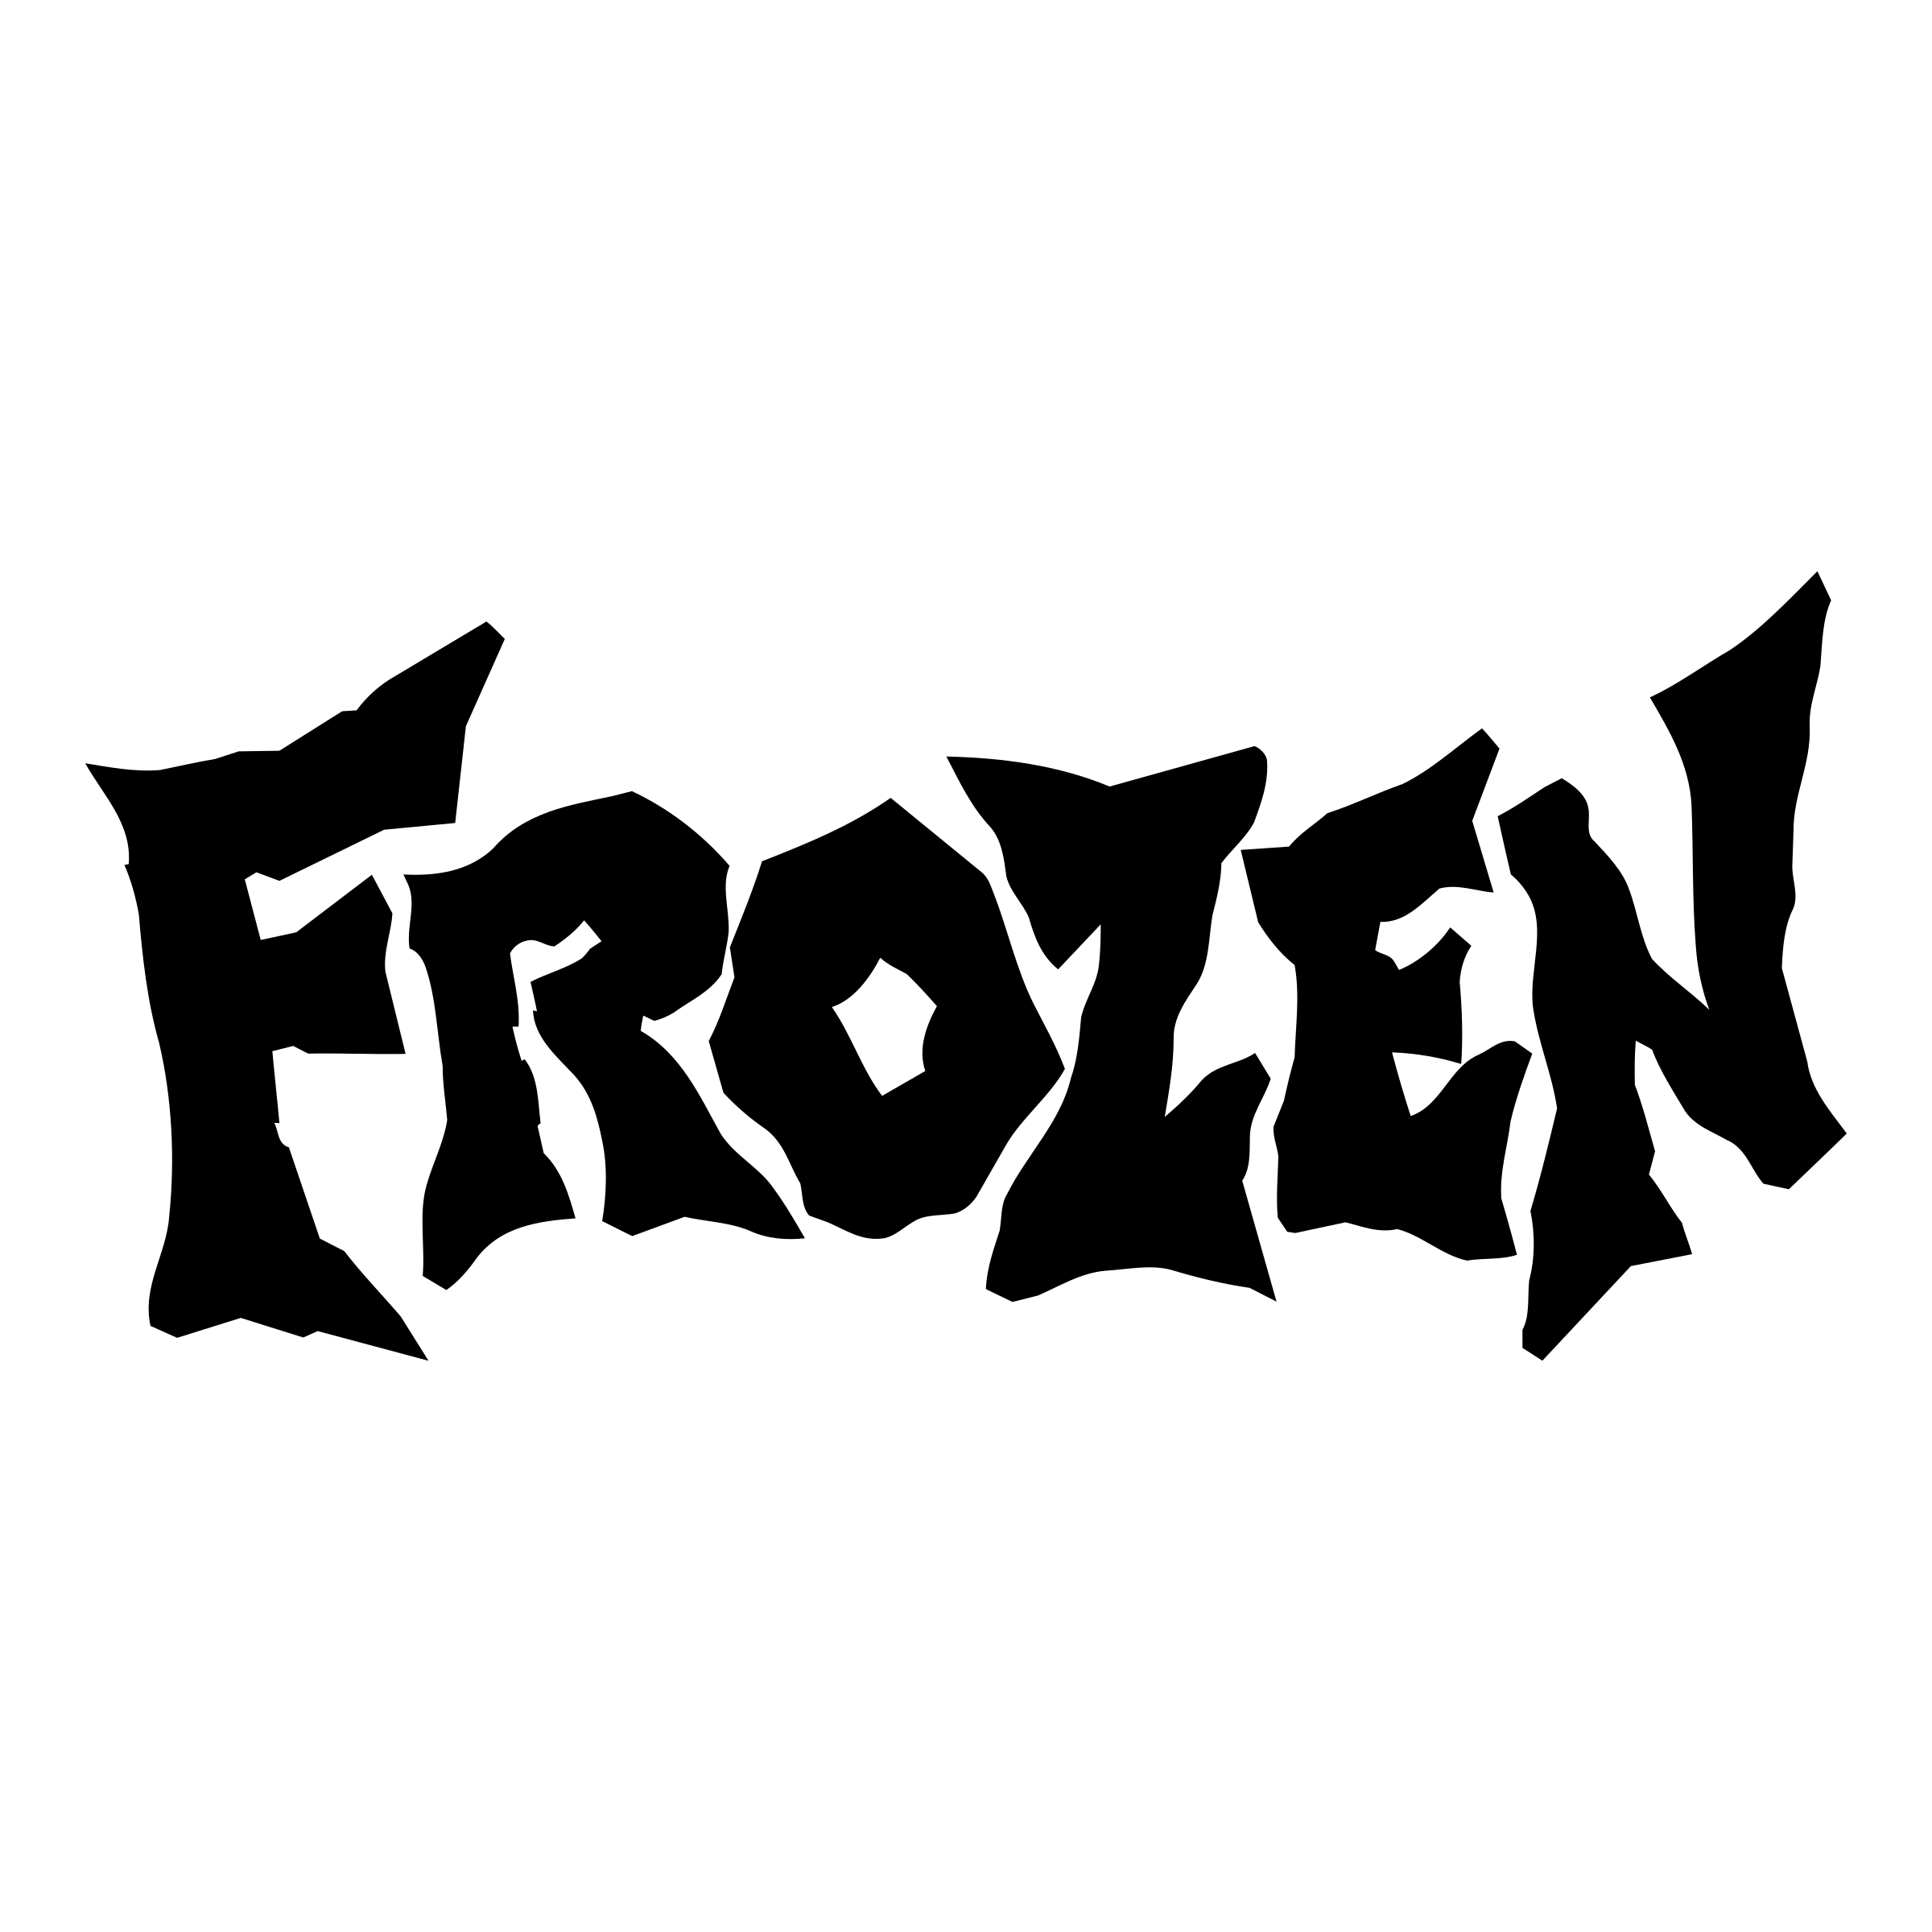 Frozen Black and White Logo - Frozen Logo Png (image in Collection)